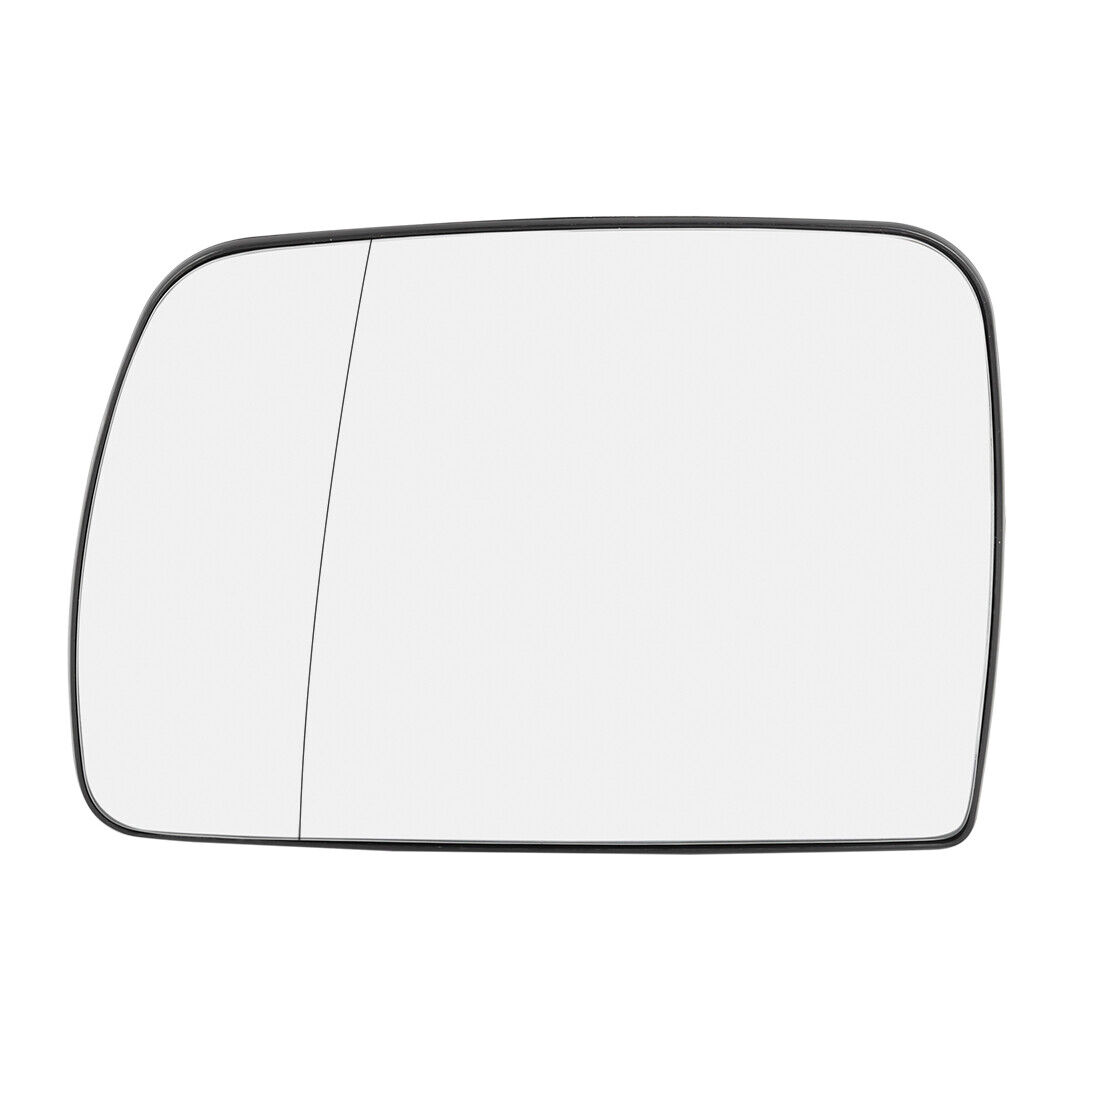 Car Left Side Rearview Mirror Glass Heated w/ Backing for BMW X5 2000-2006